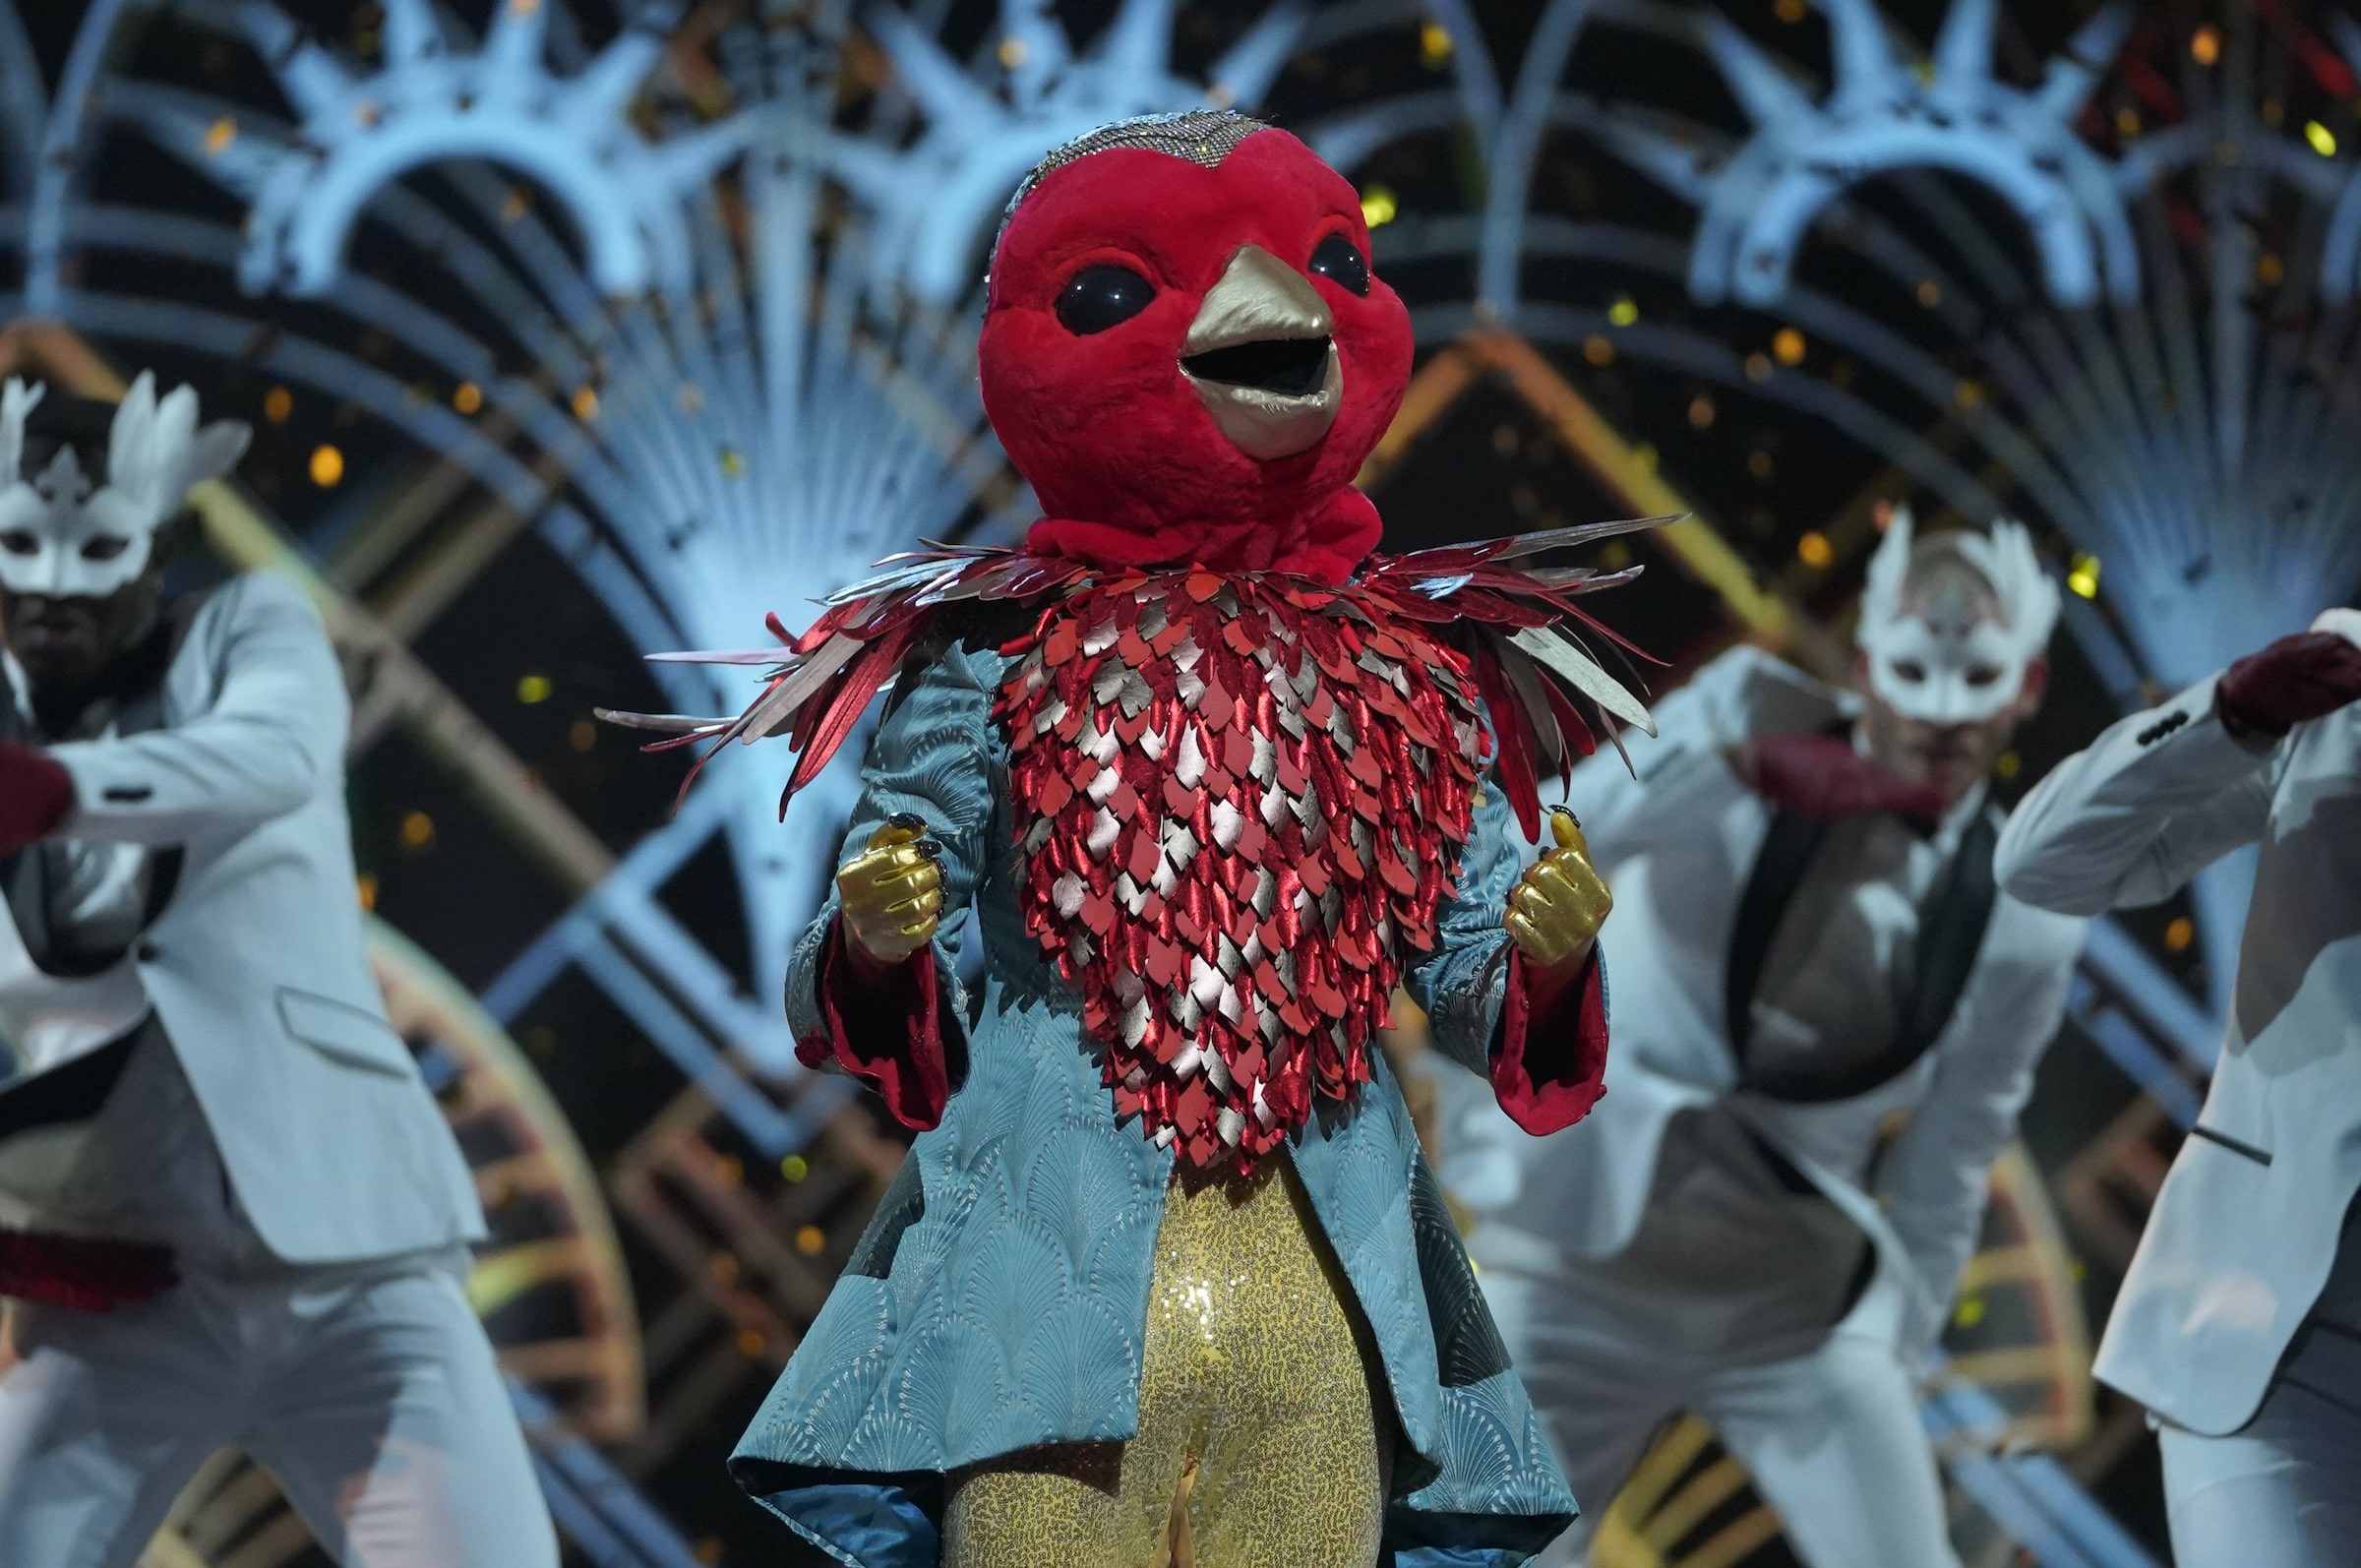 The Masked Singer recap! Watch all the performances and results from